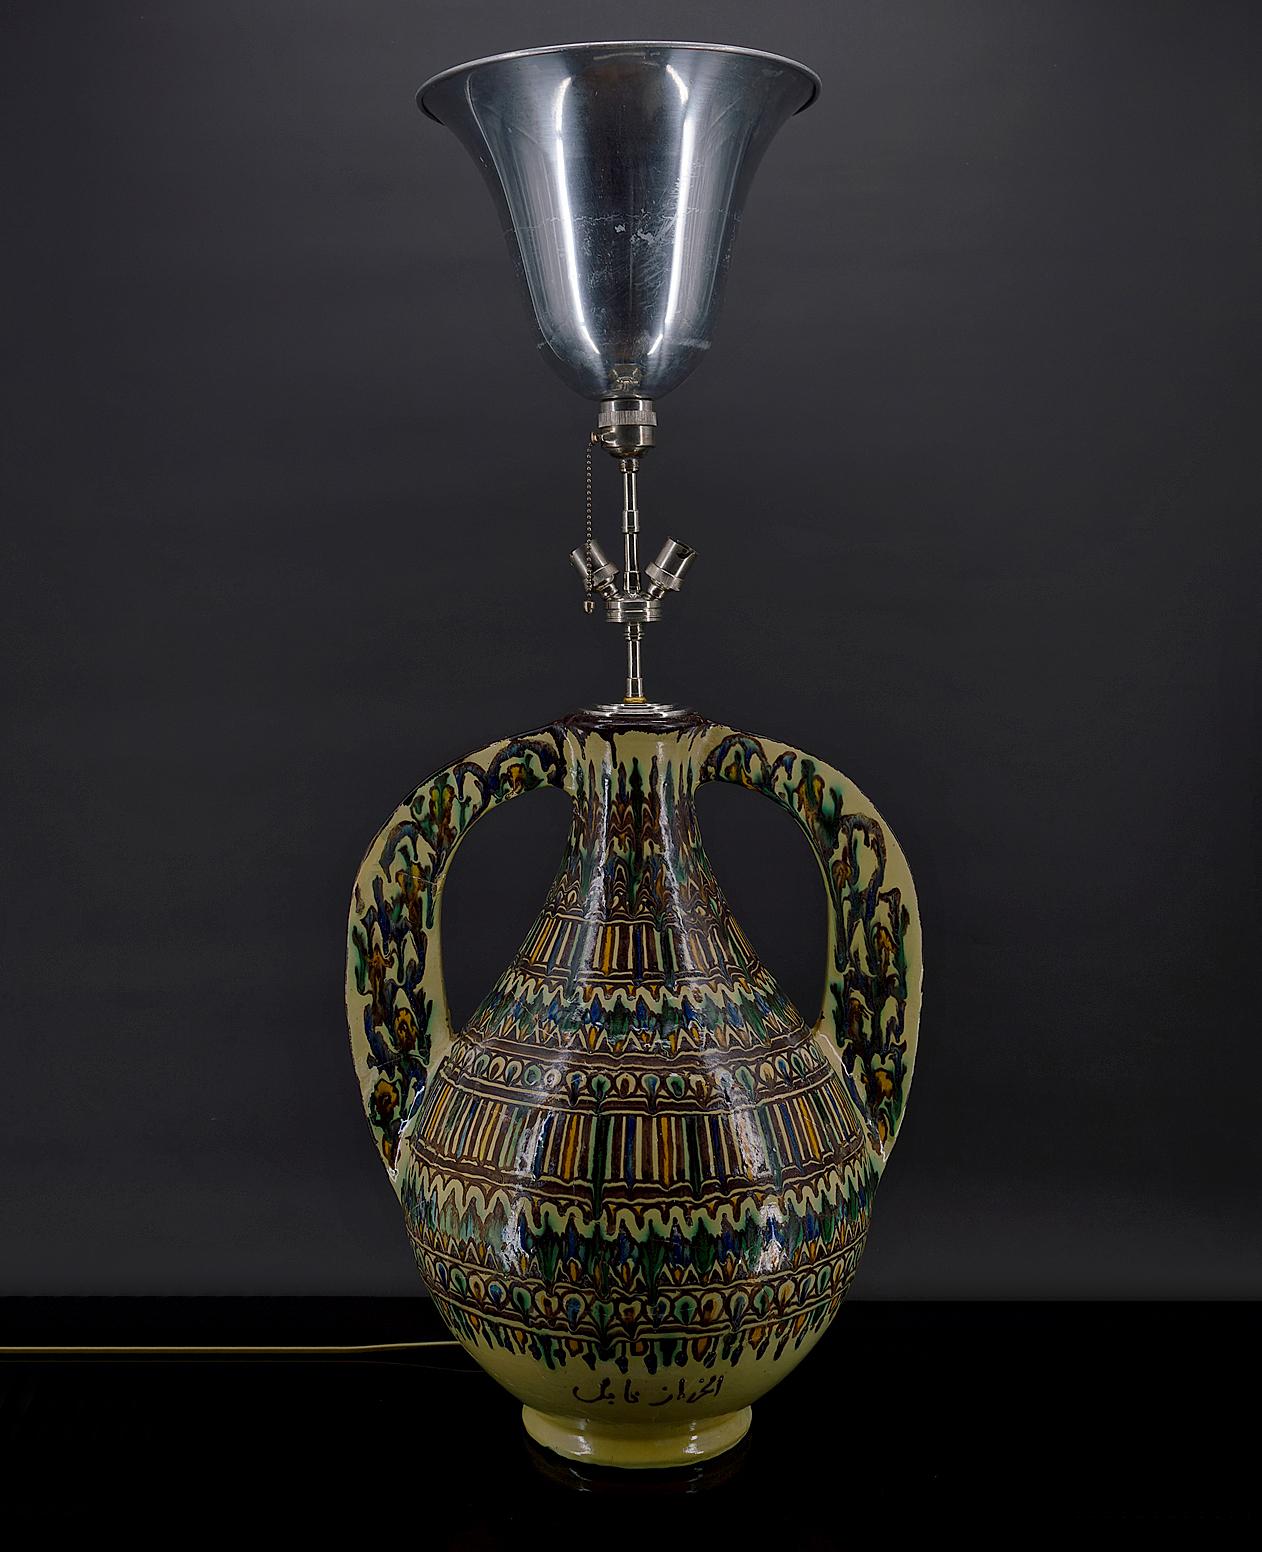 Important ceramic vase mounted as a lamp.
Nabeul, Tunisia, early 20th century.
Signed.
By El-Kharraz

The Kharraz family is originally from Andalusia and came to settle in Tunisia during the 17th century. Potters from father to son, the first